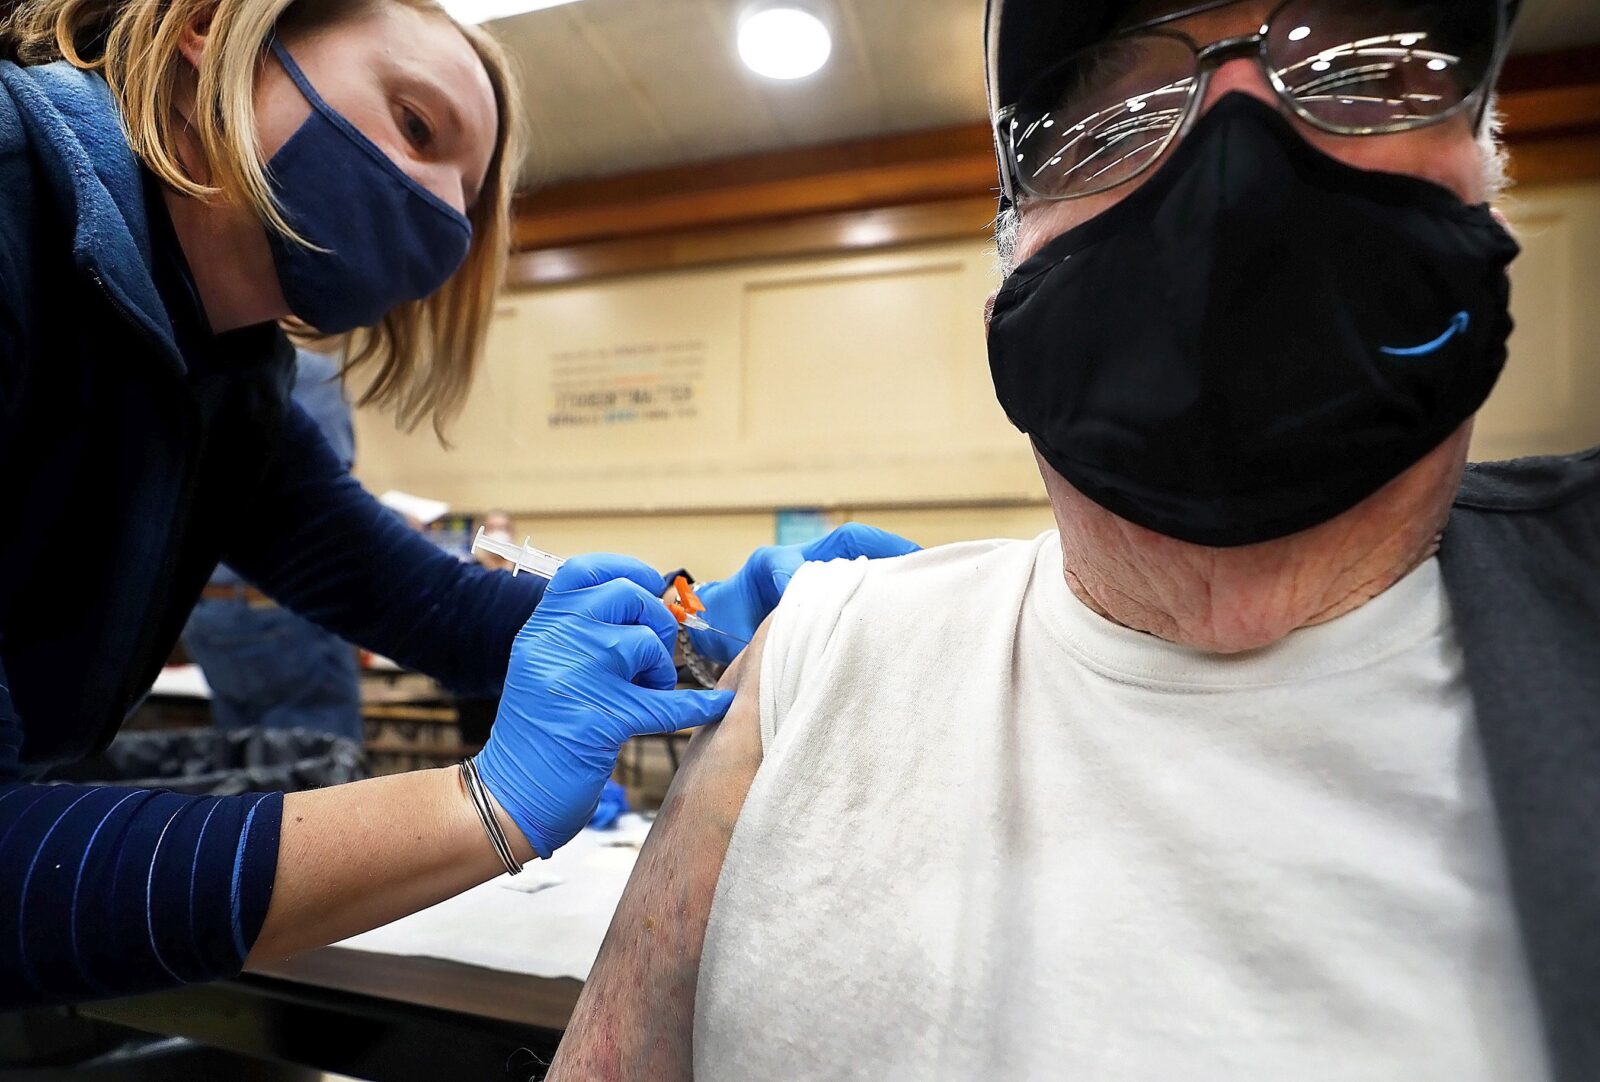 Amber Pedro, a volunteer from Family Practice Laporte, administers the vaccine into the arm of Robert Keen, 84 of Forksville, in the cafeteria of the Sullivan County Elementary School. (Fred Adams / Spotlight PA)